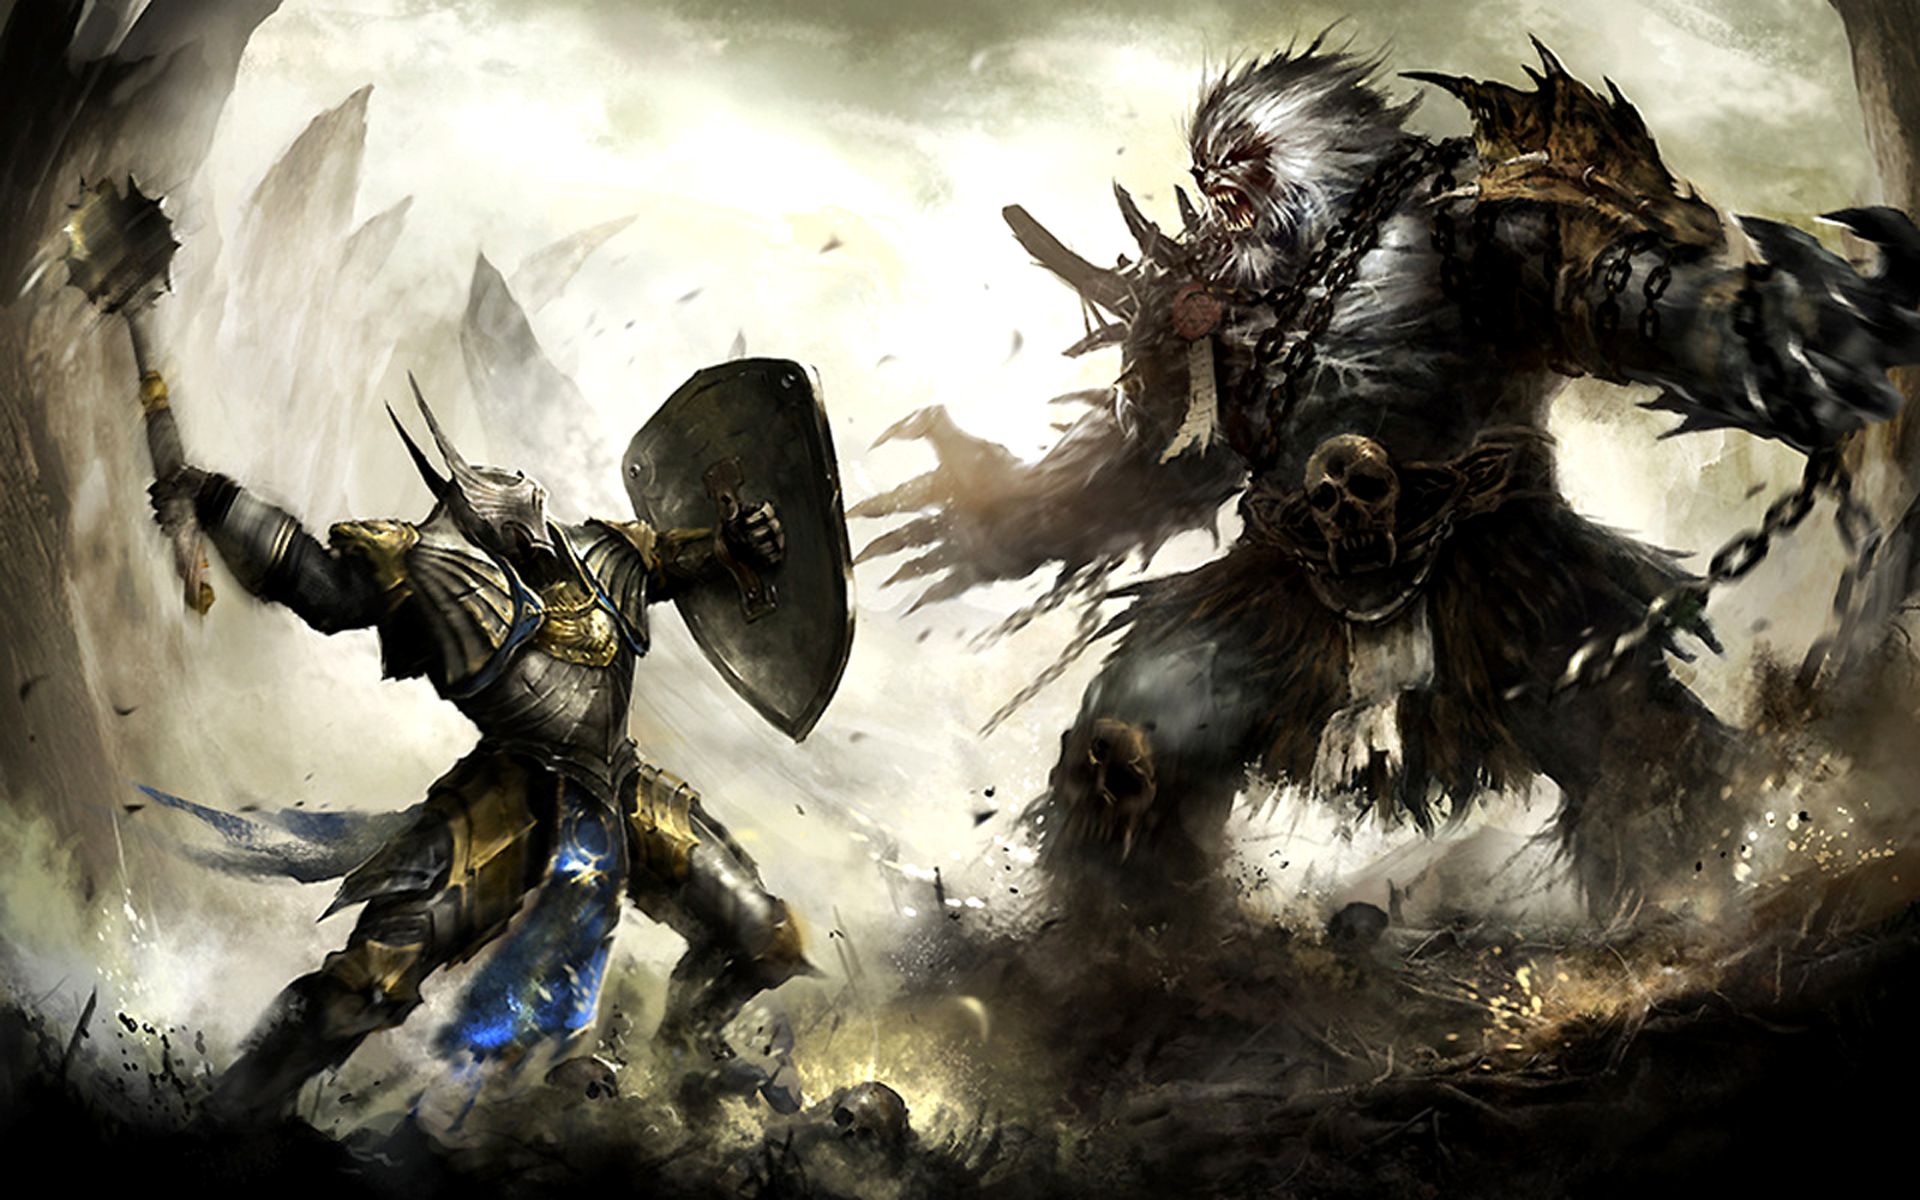 Fantasy knight battling a beast, shield, and armor with skull and claw symbols.